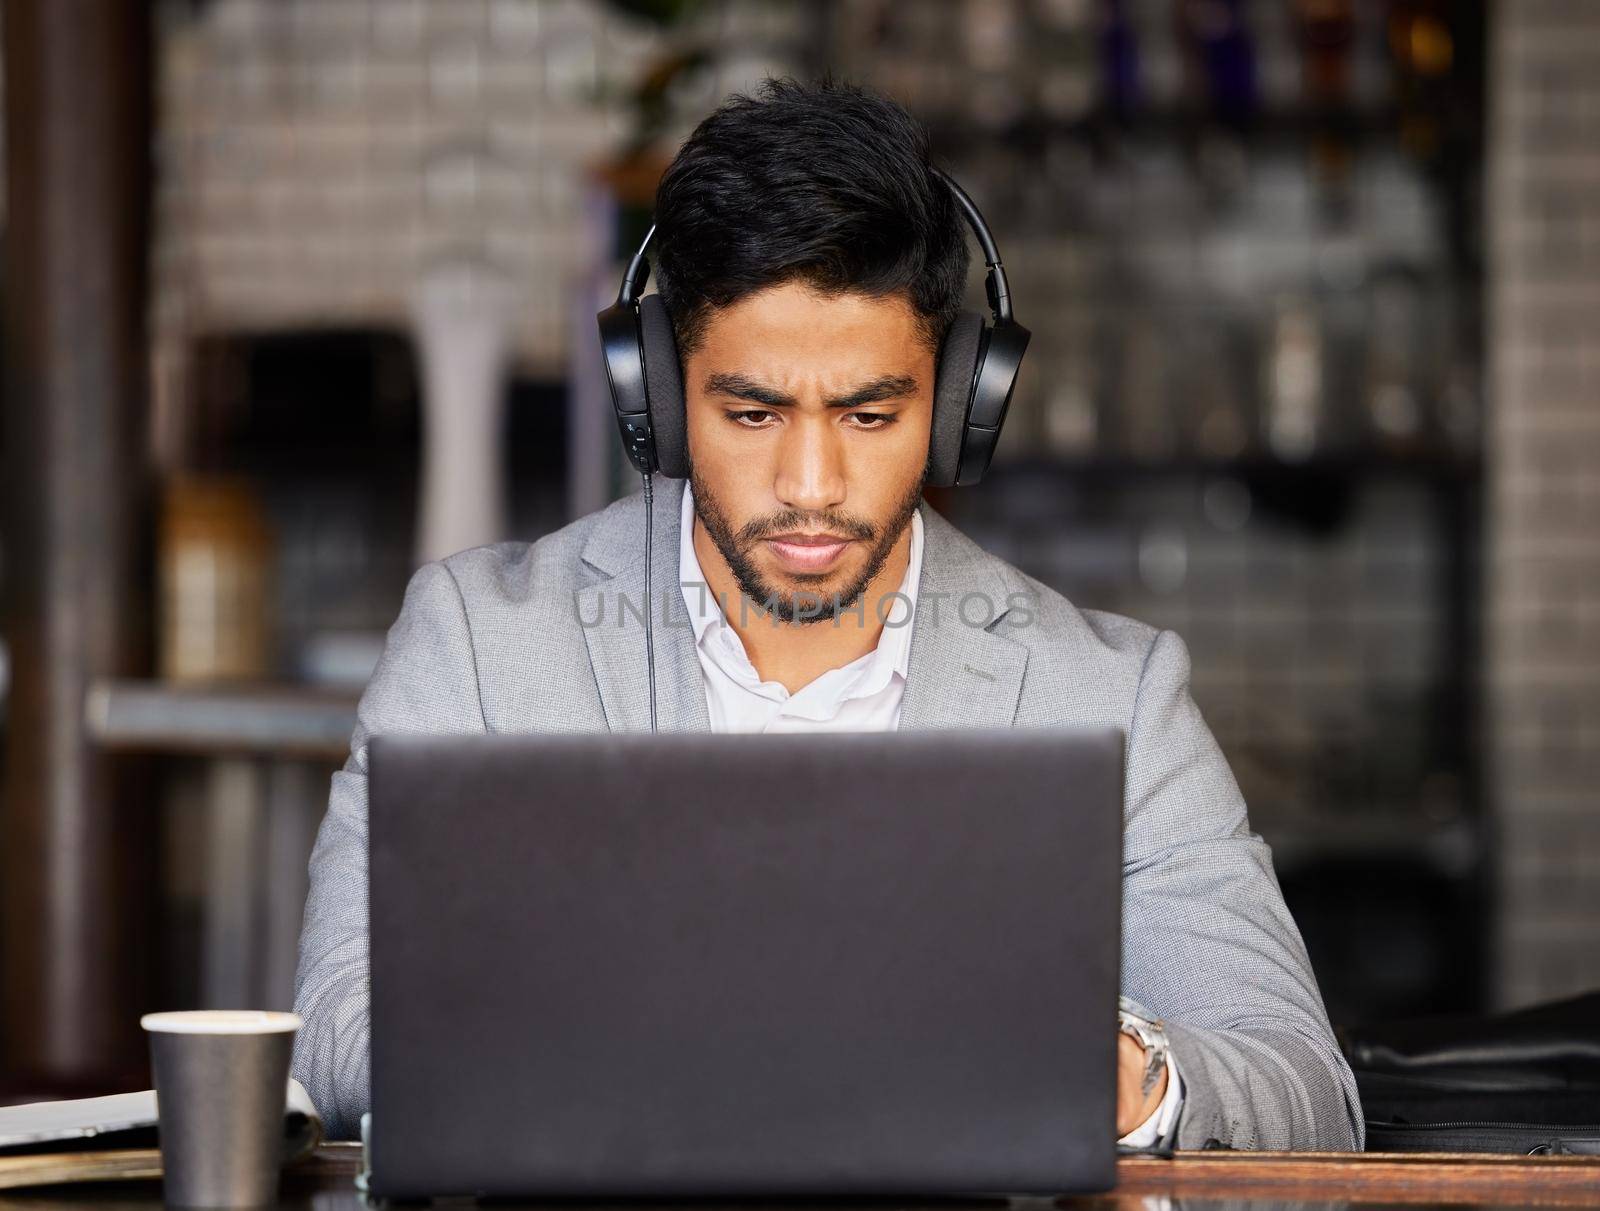 Shot of a young businessman wearing headphones while using a laptop at a cafe.